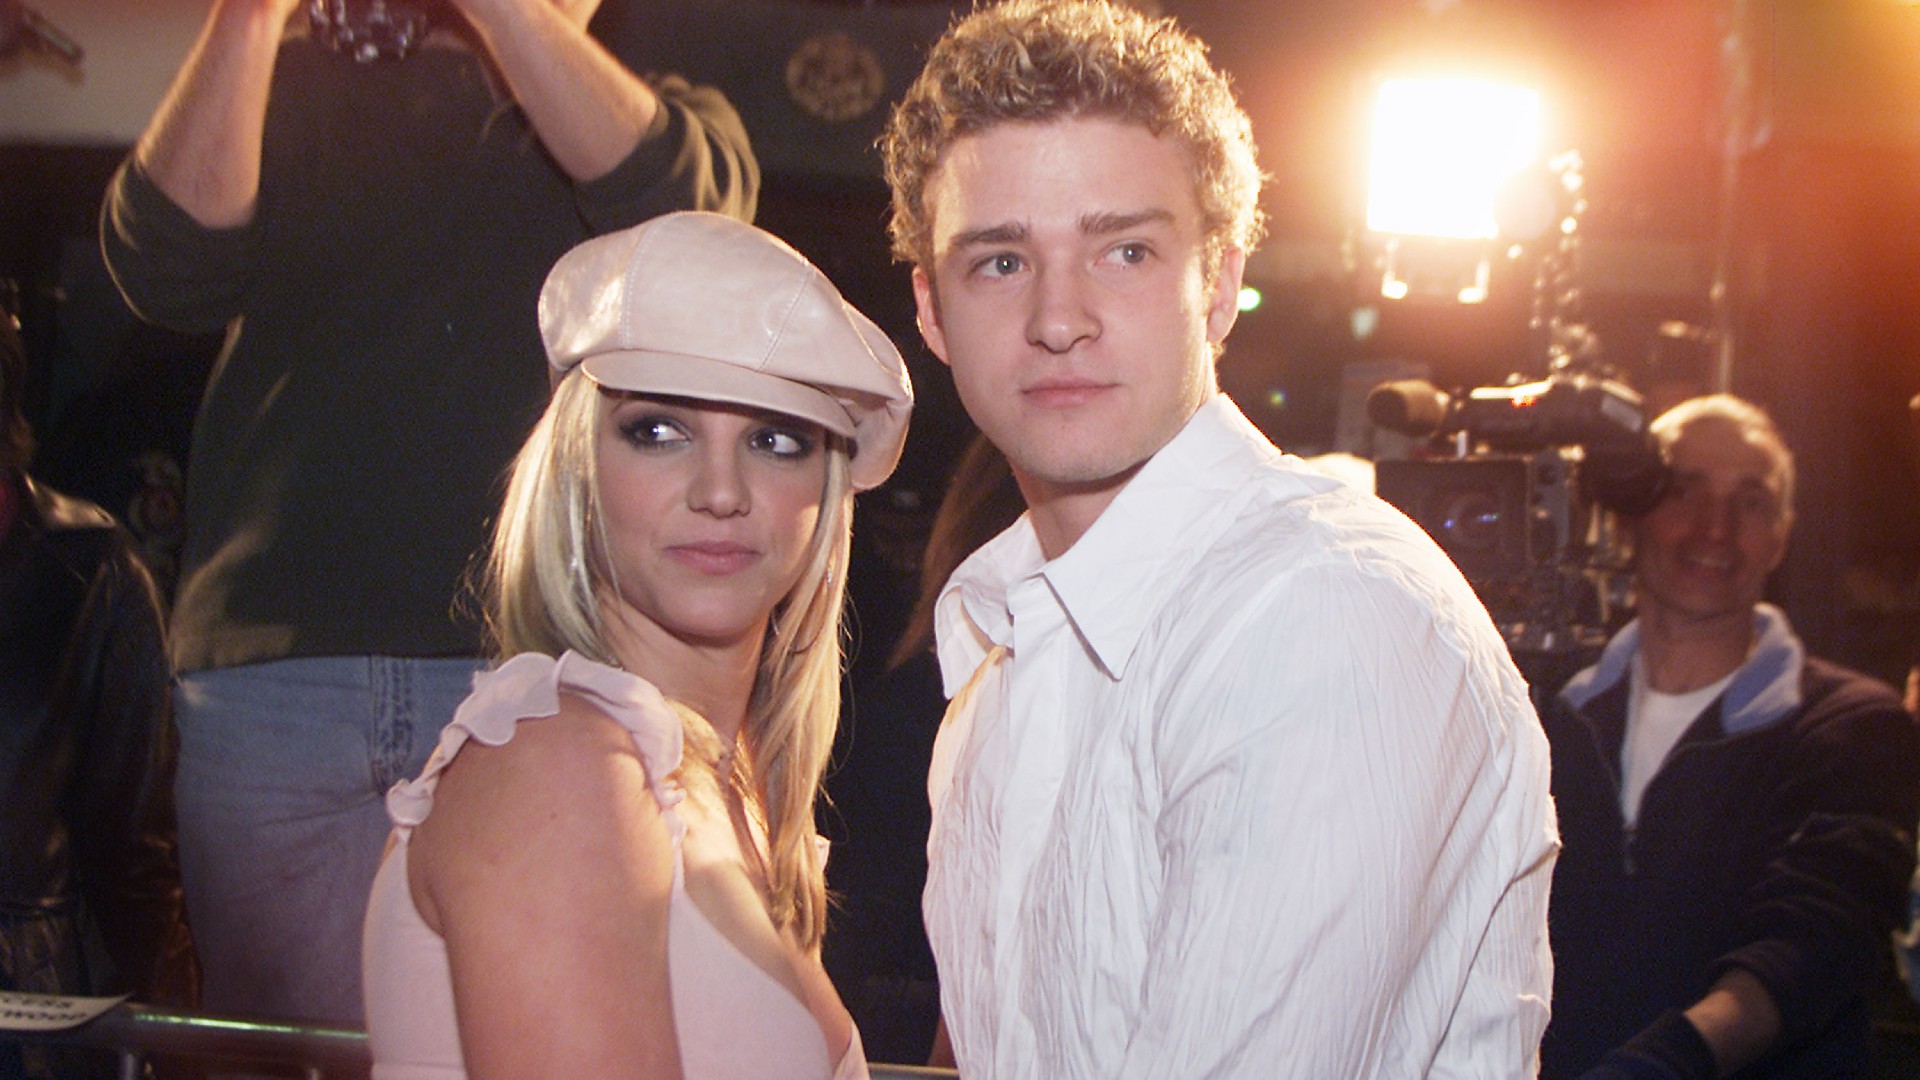 Britney Spears admits to having an abortion during her relationship with Justin Timberlake.